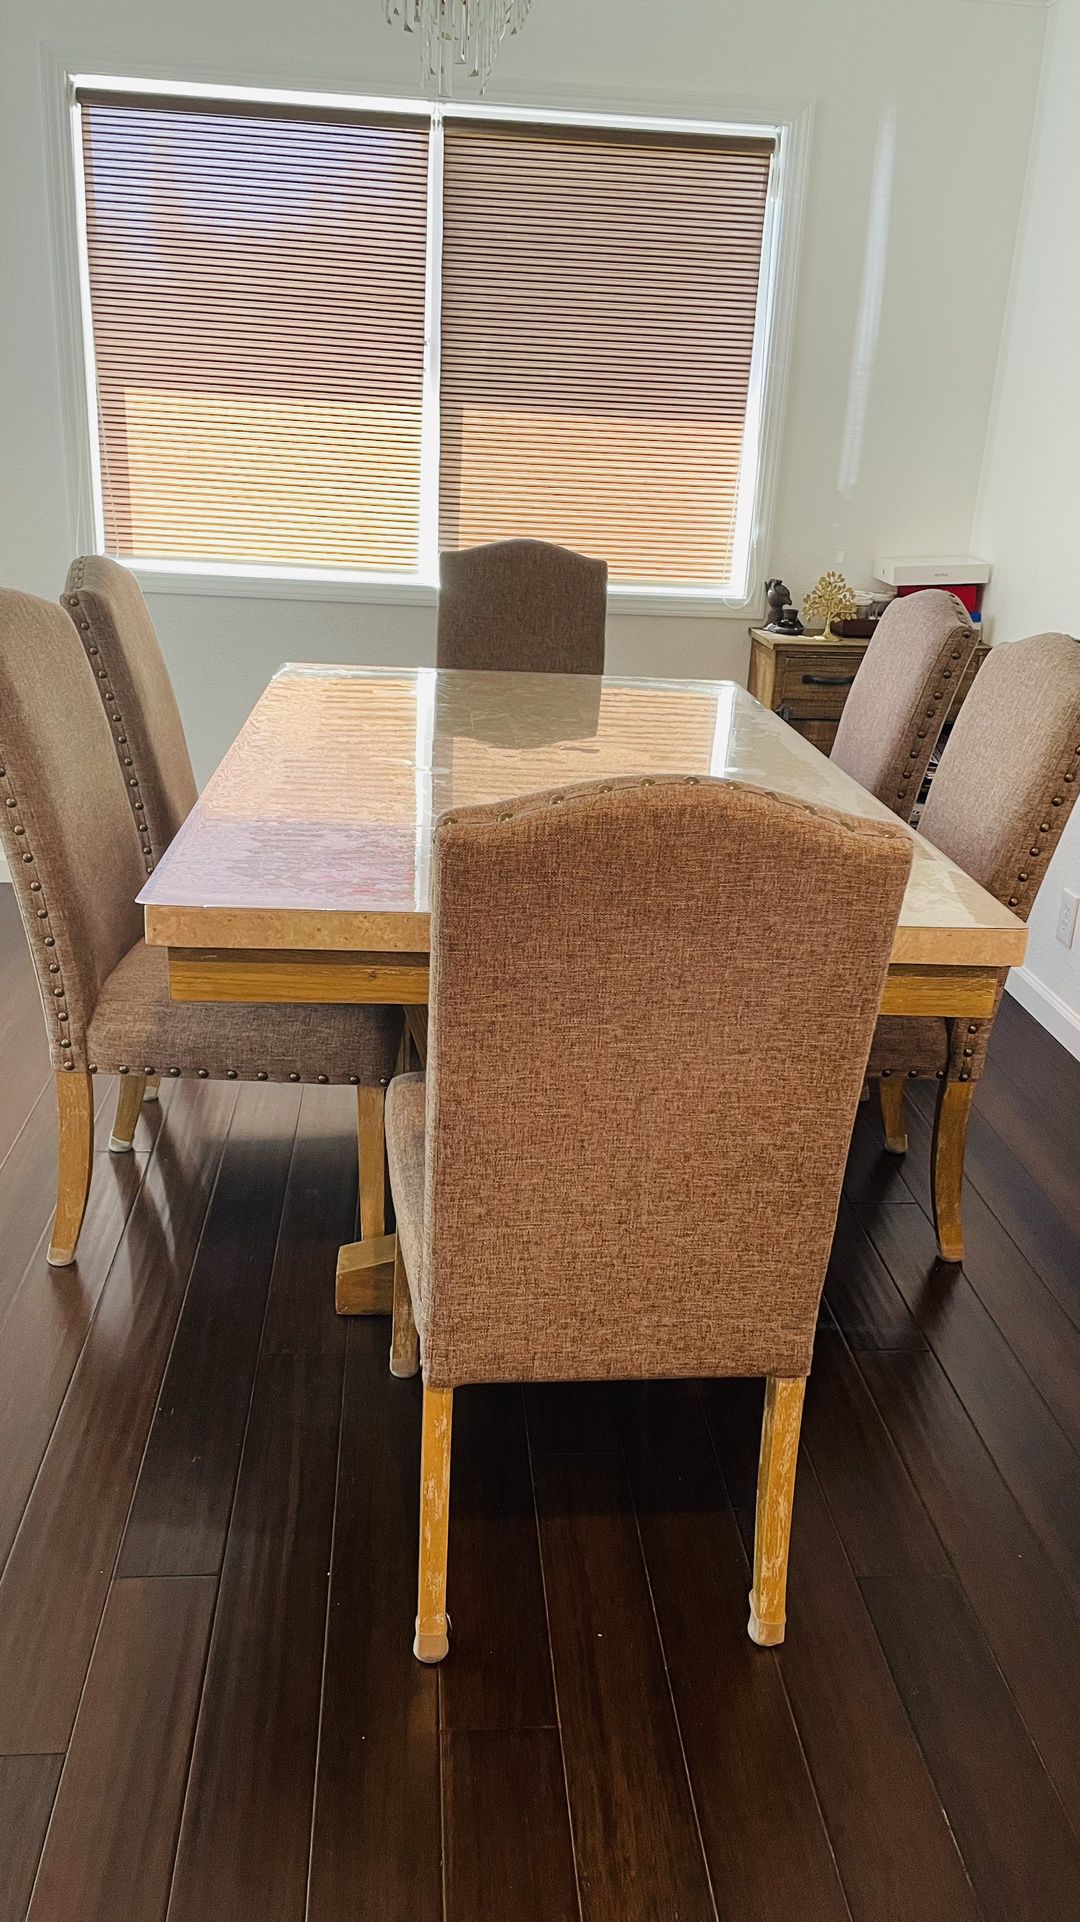 DINING SET - 6 Chairs 